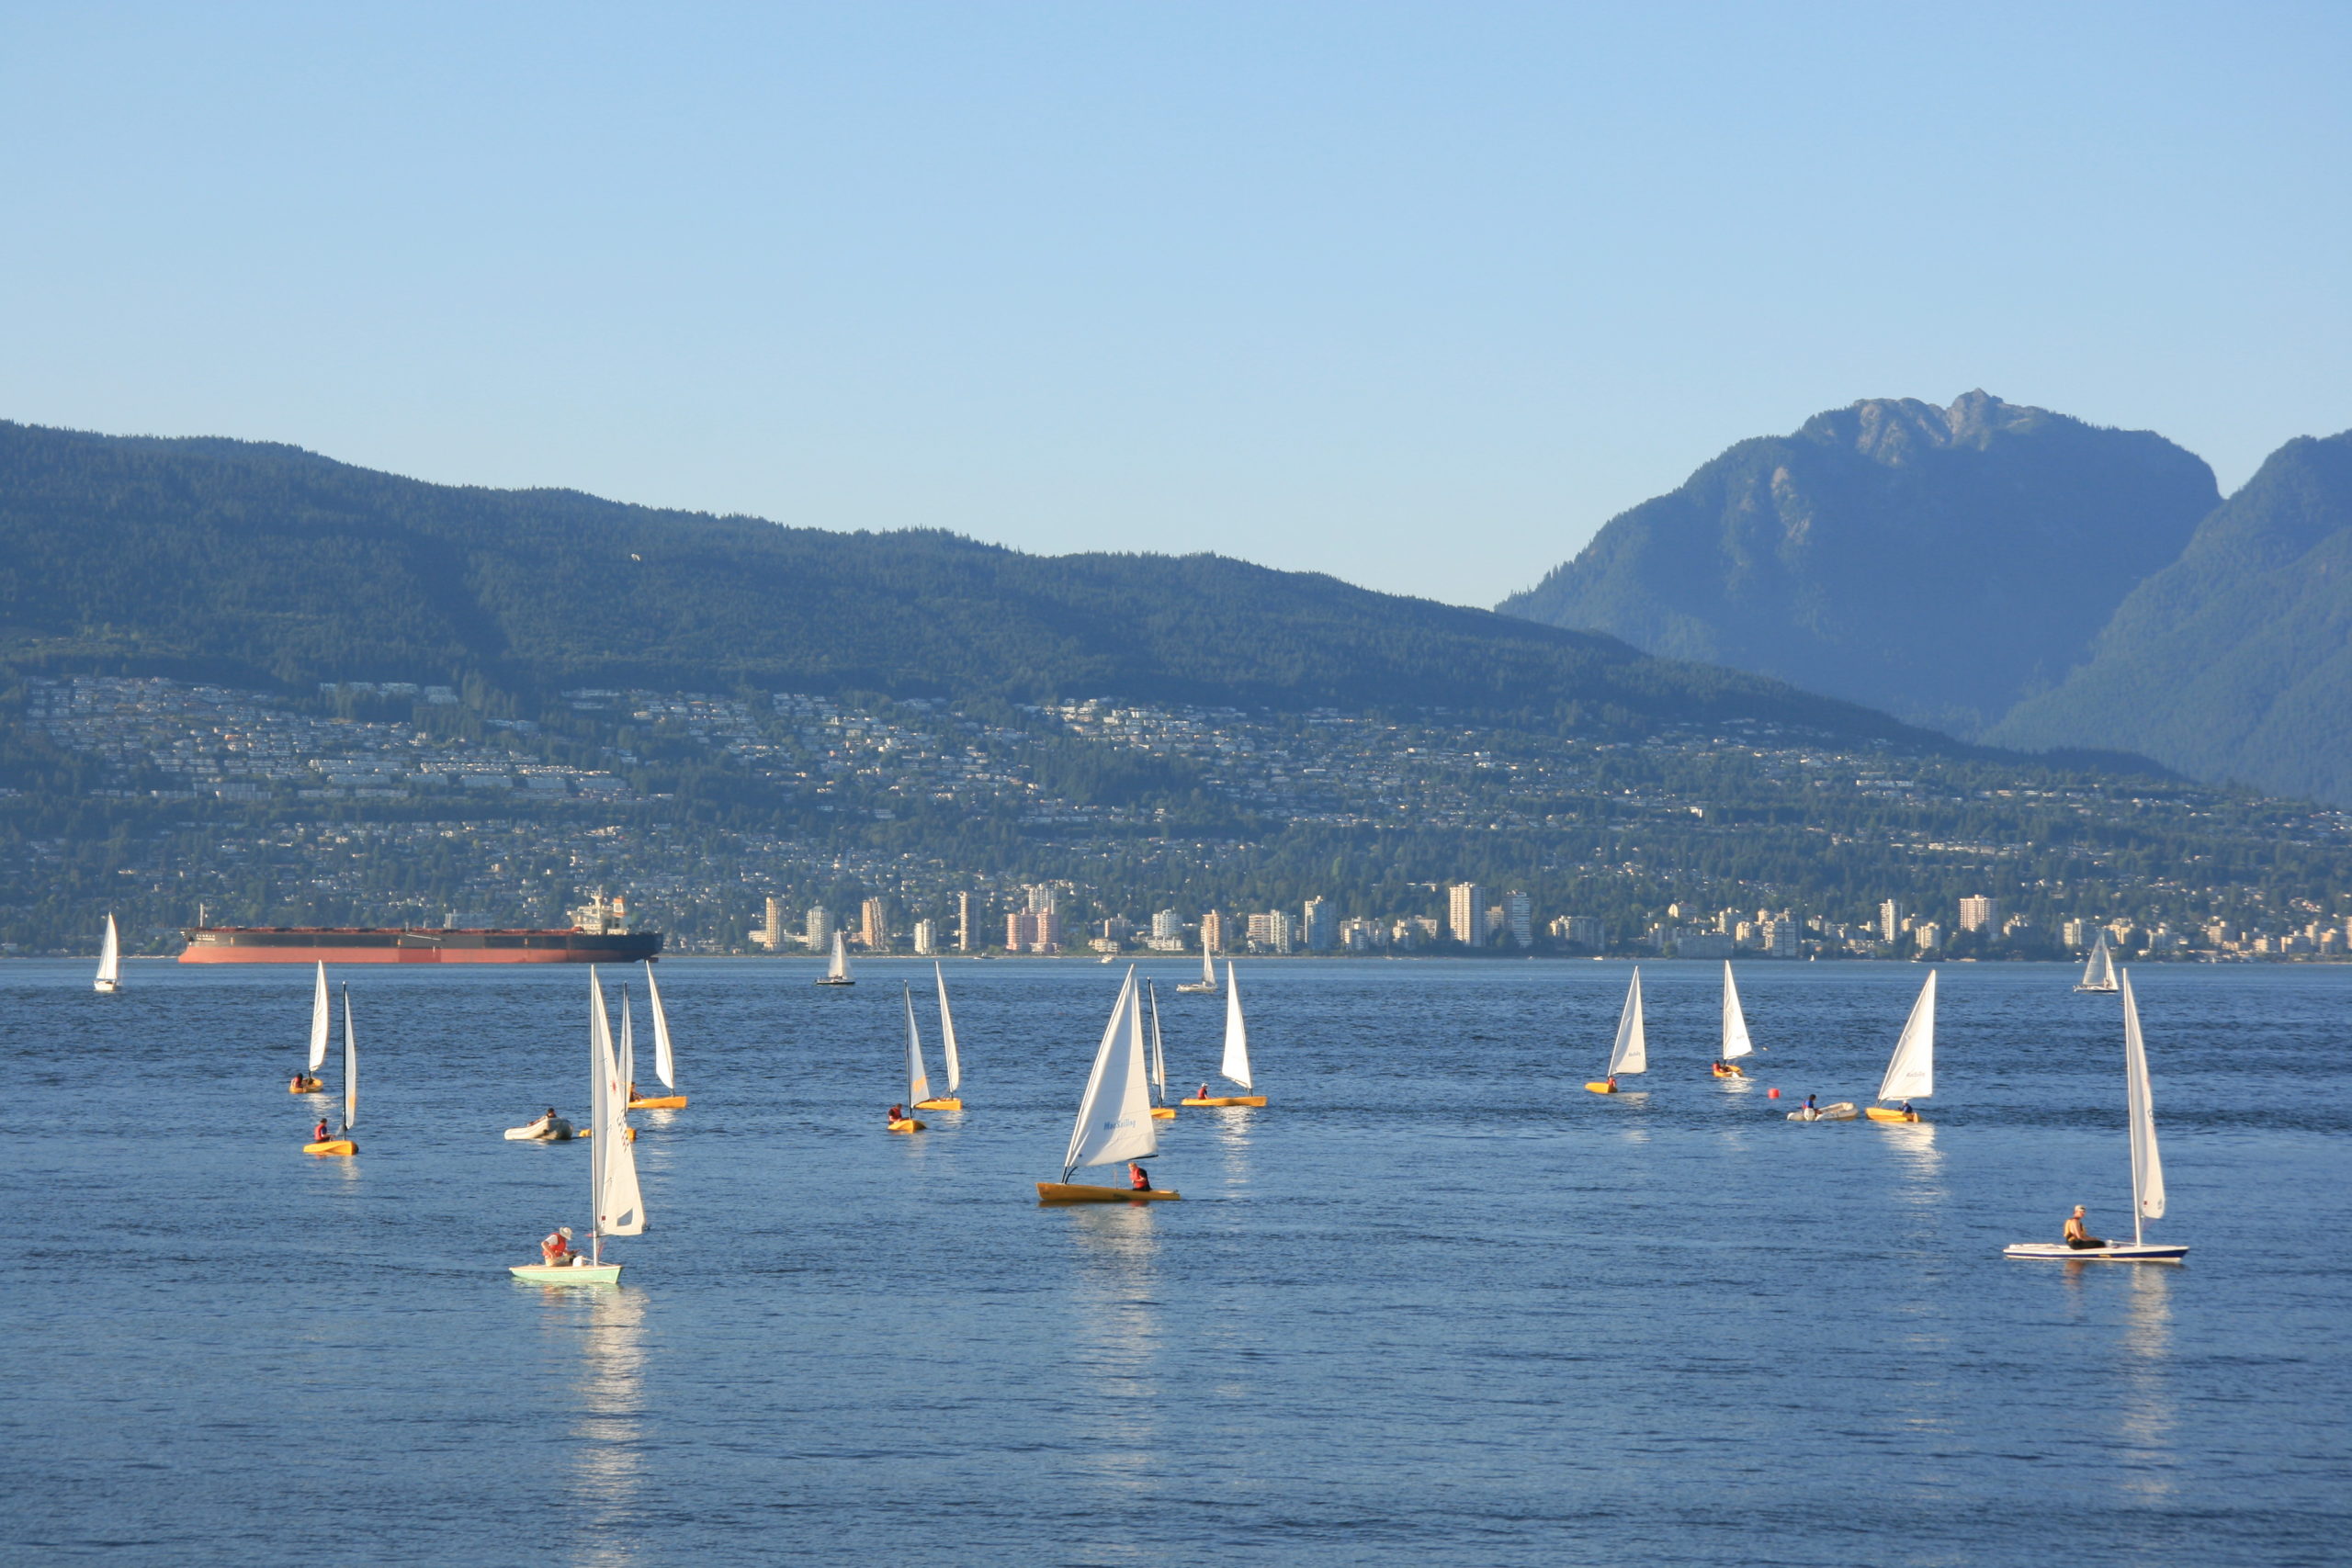 Sailboats in Burrard Inlet as seen from Locarno Beach